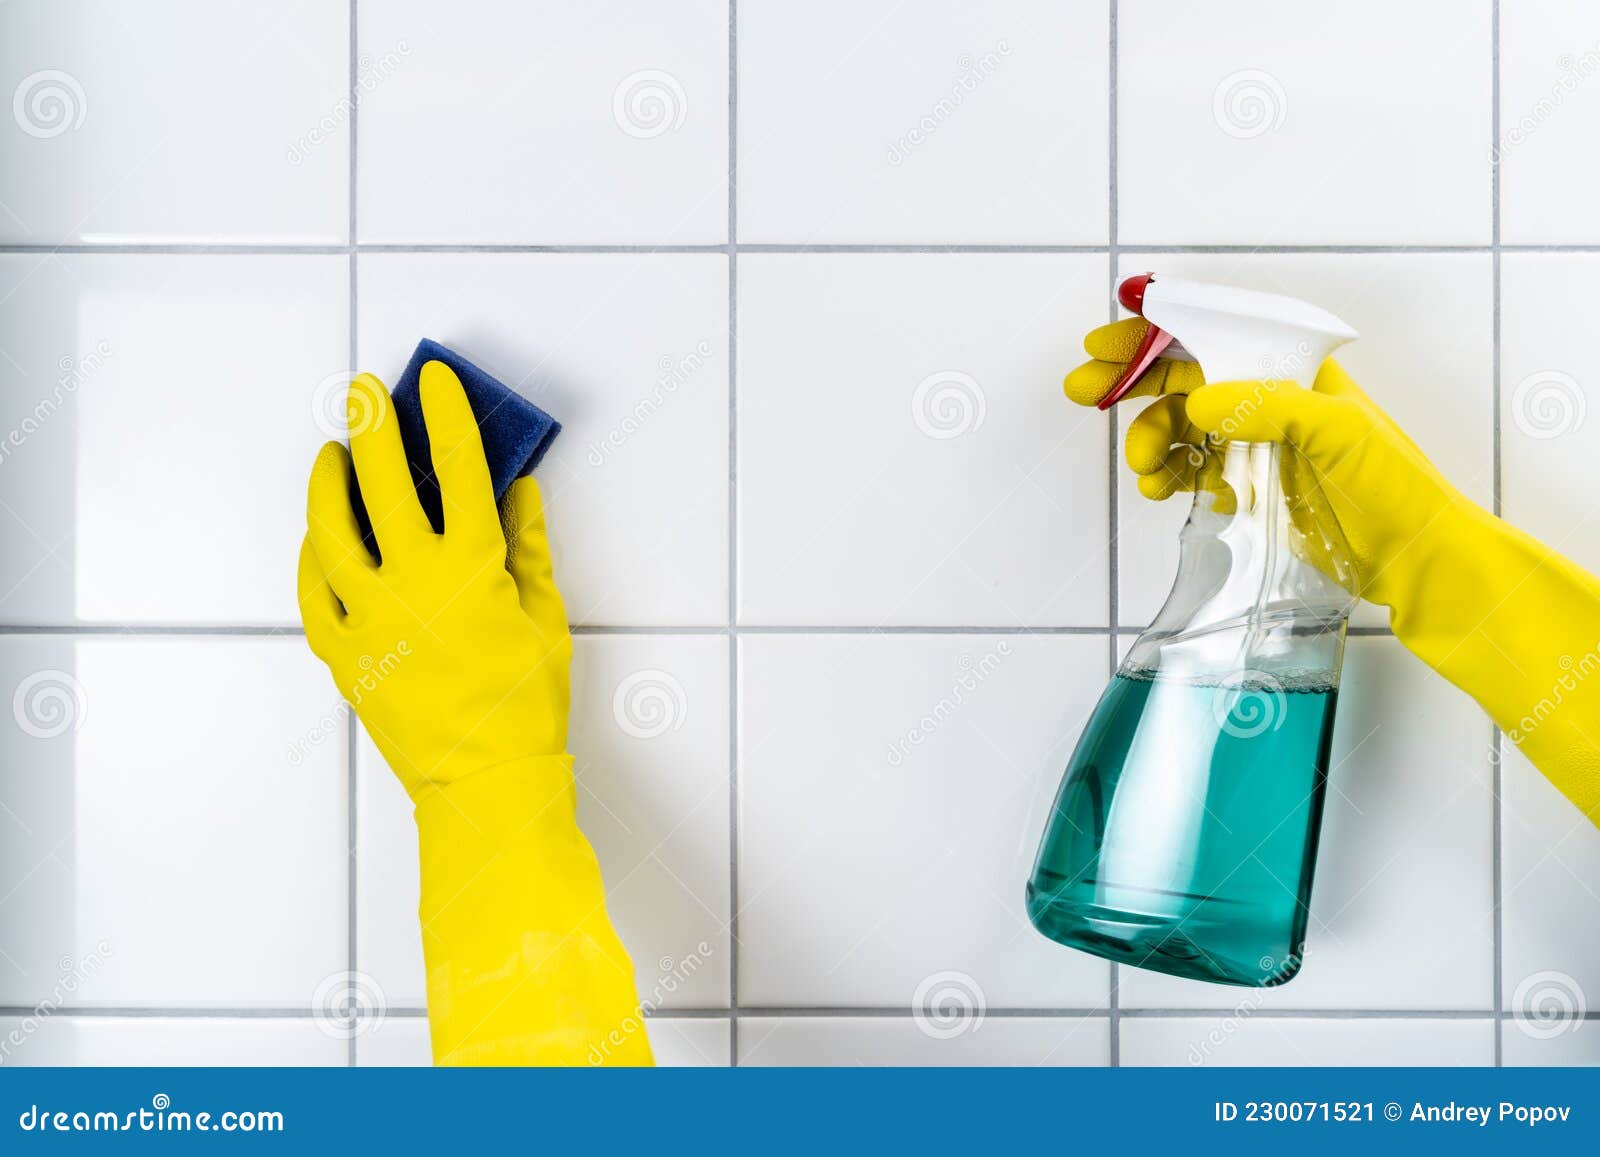 tile wall grout cleaning with sponge